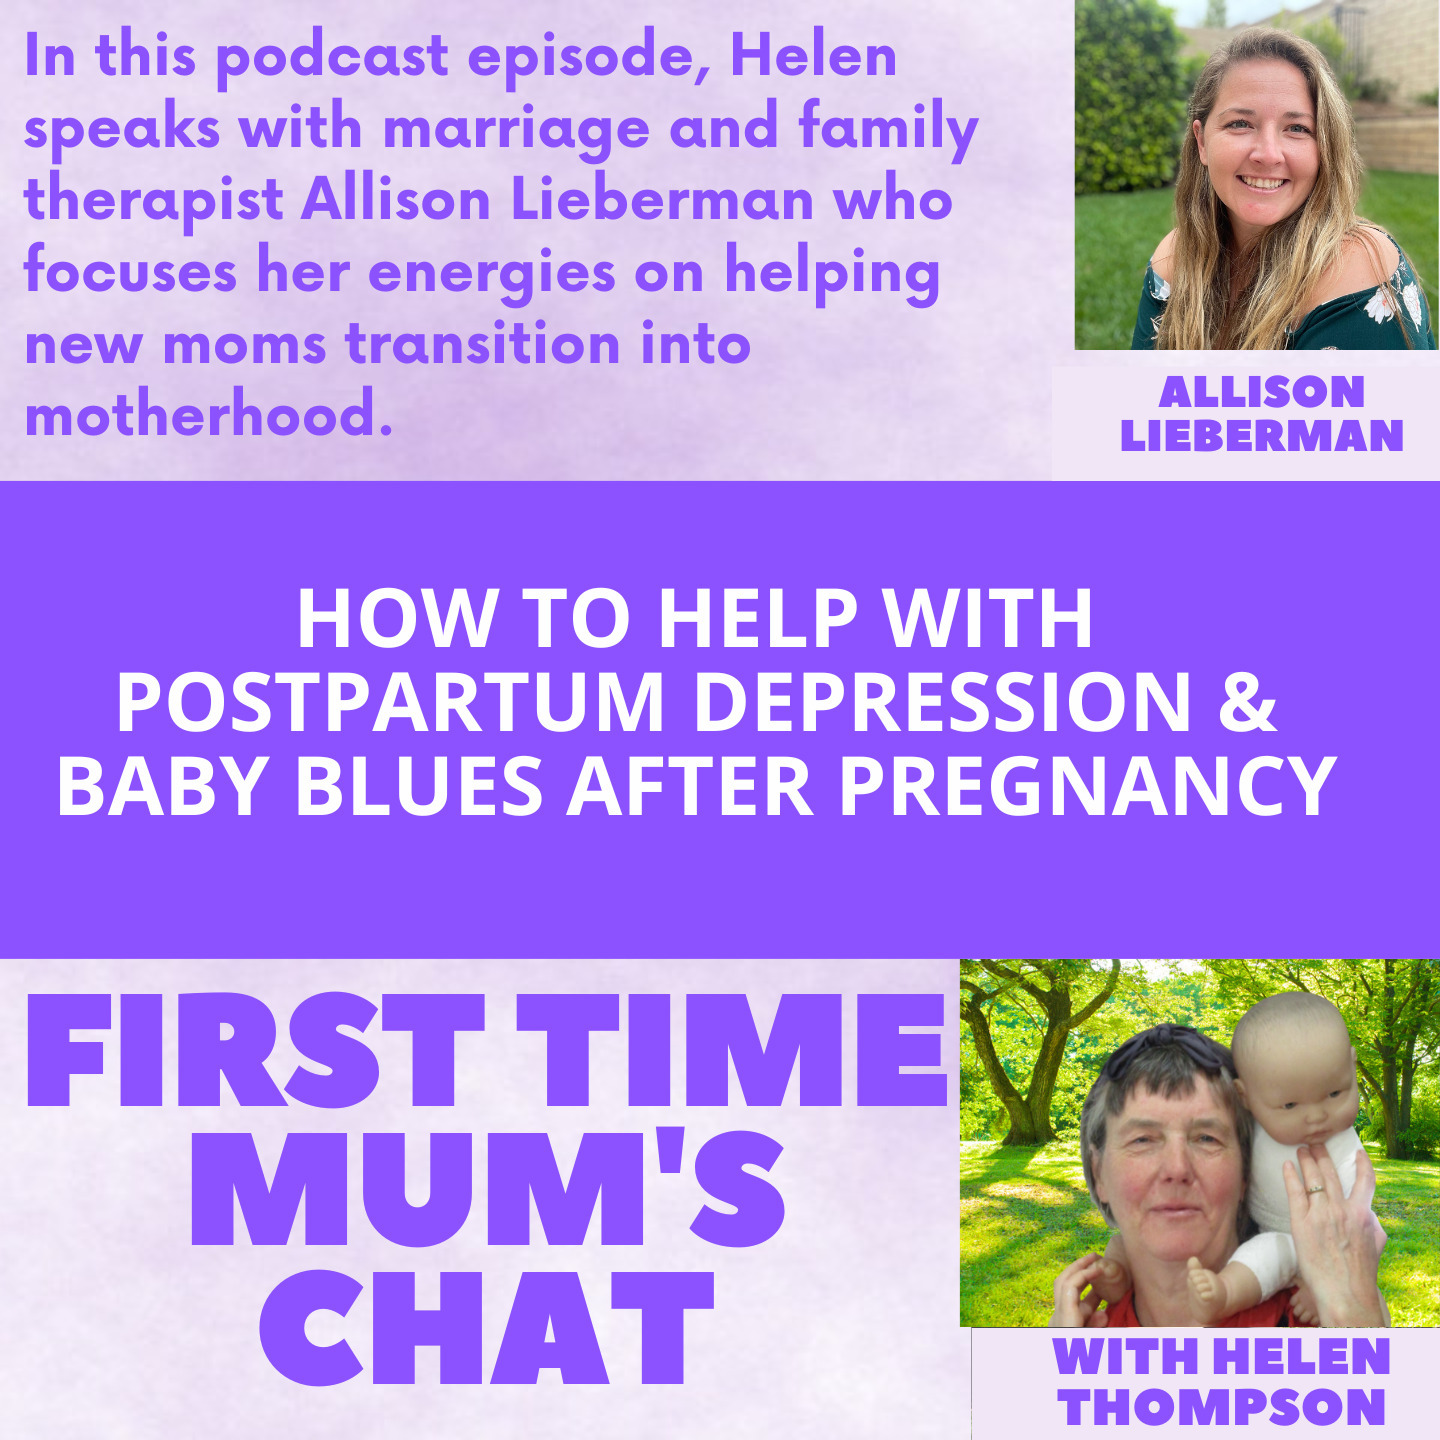 How to Help With Postpartum Depression and Baby Blues After Pregnancy